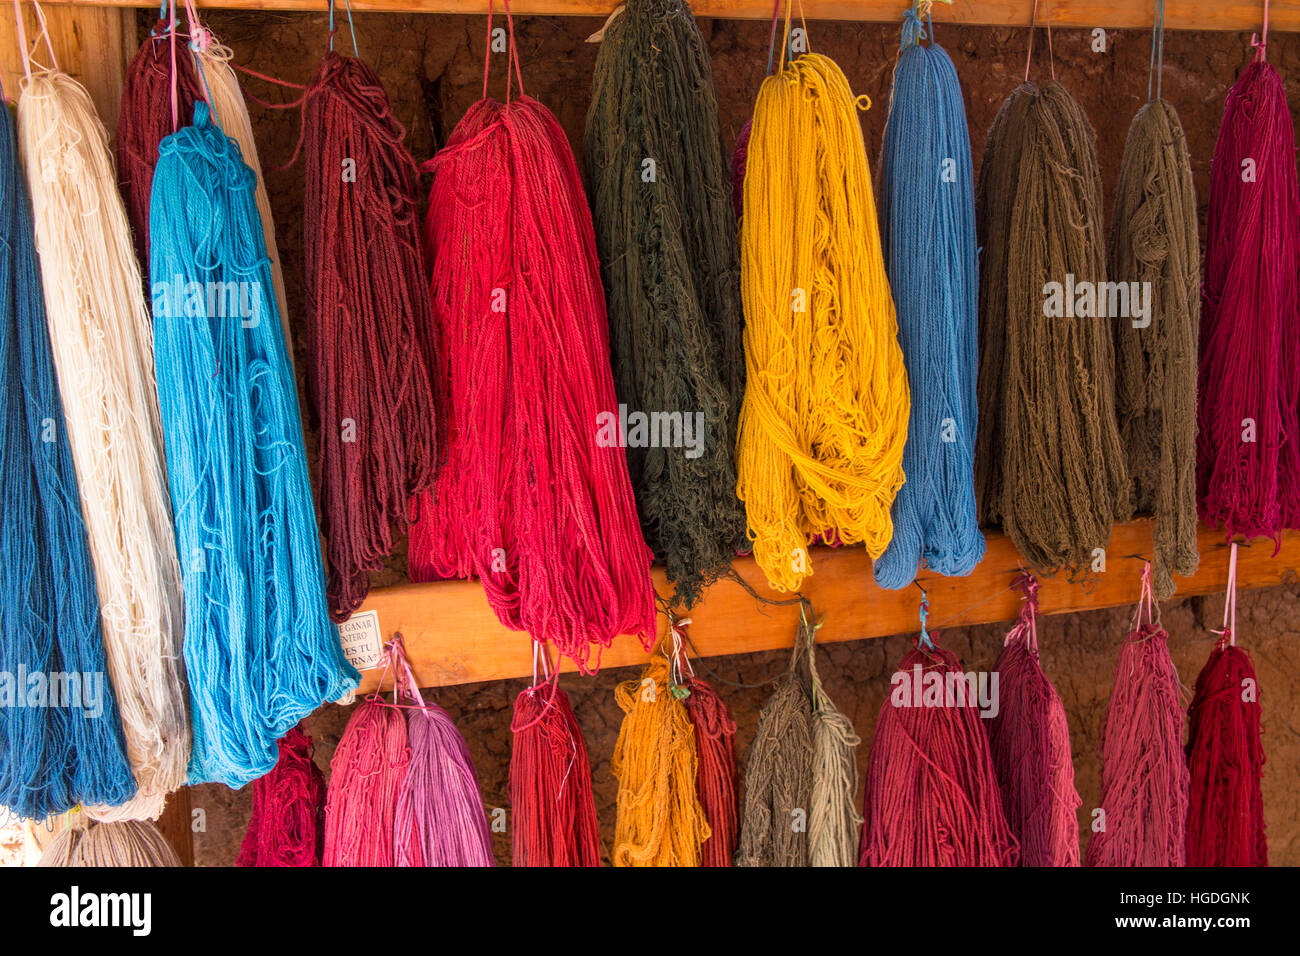 Women's cooperative for textile production, Stock Photo